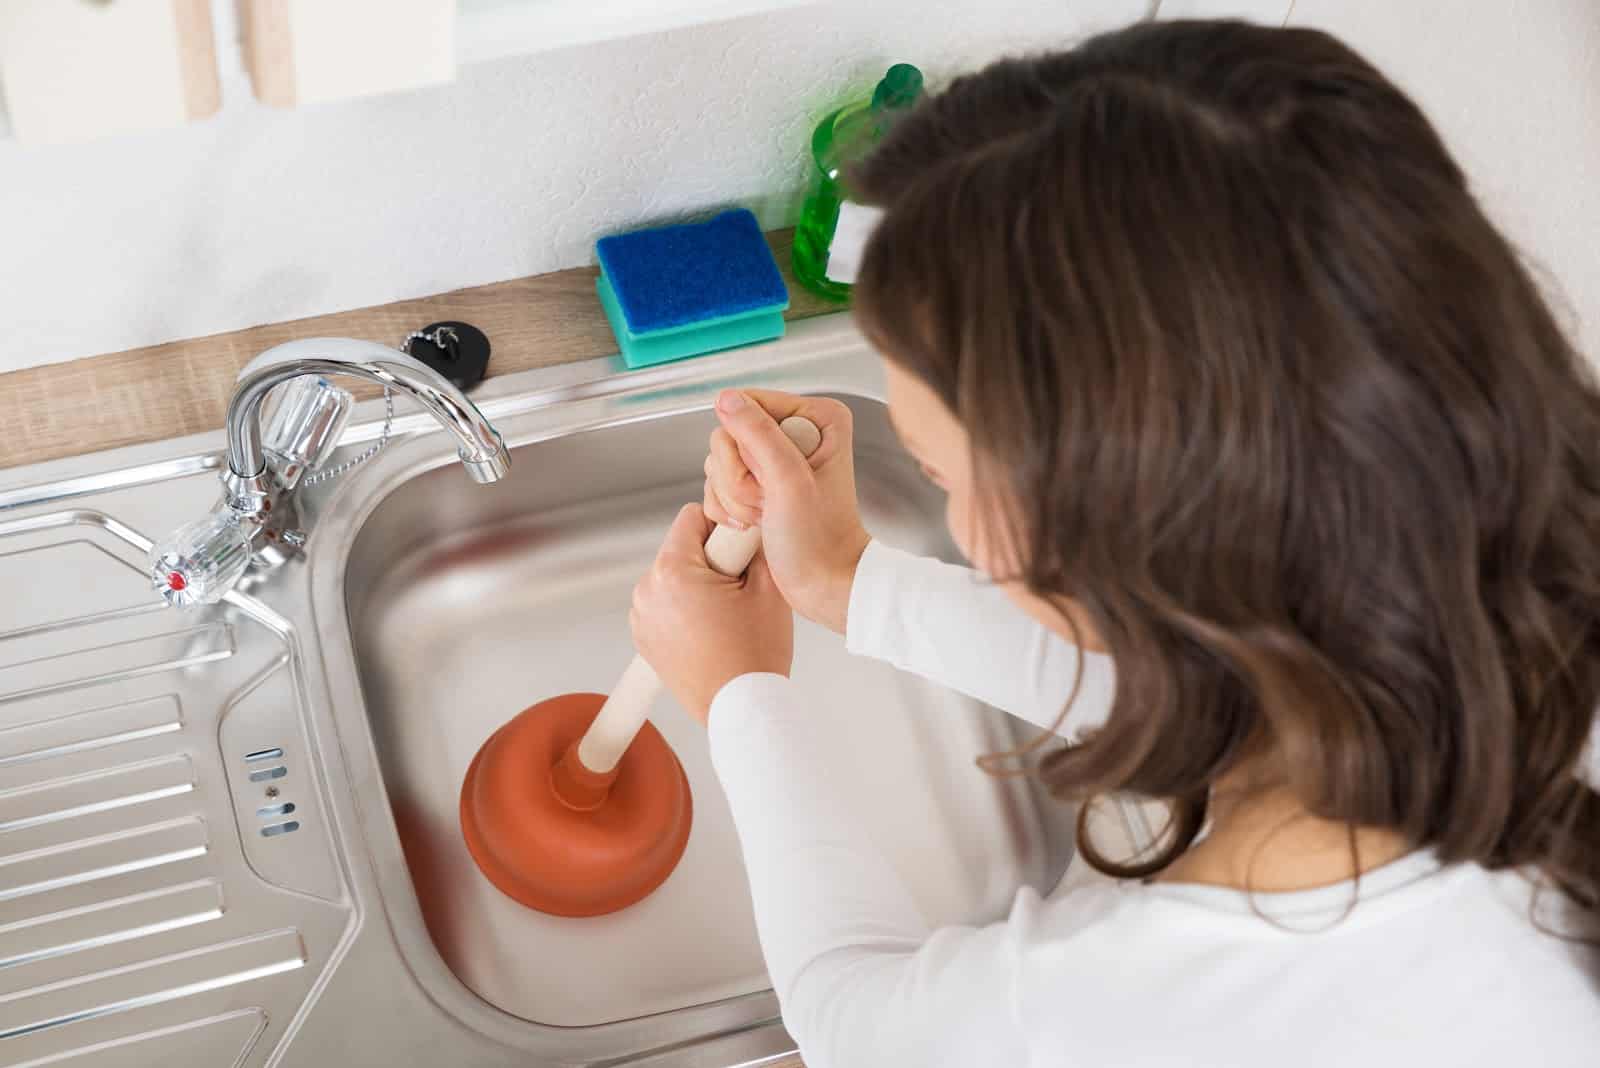 Close up of a woman using a plunger to clean a kitchen sink drain